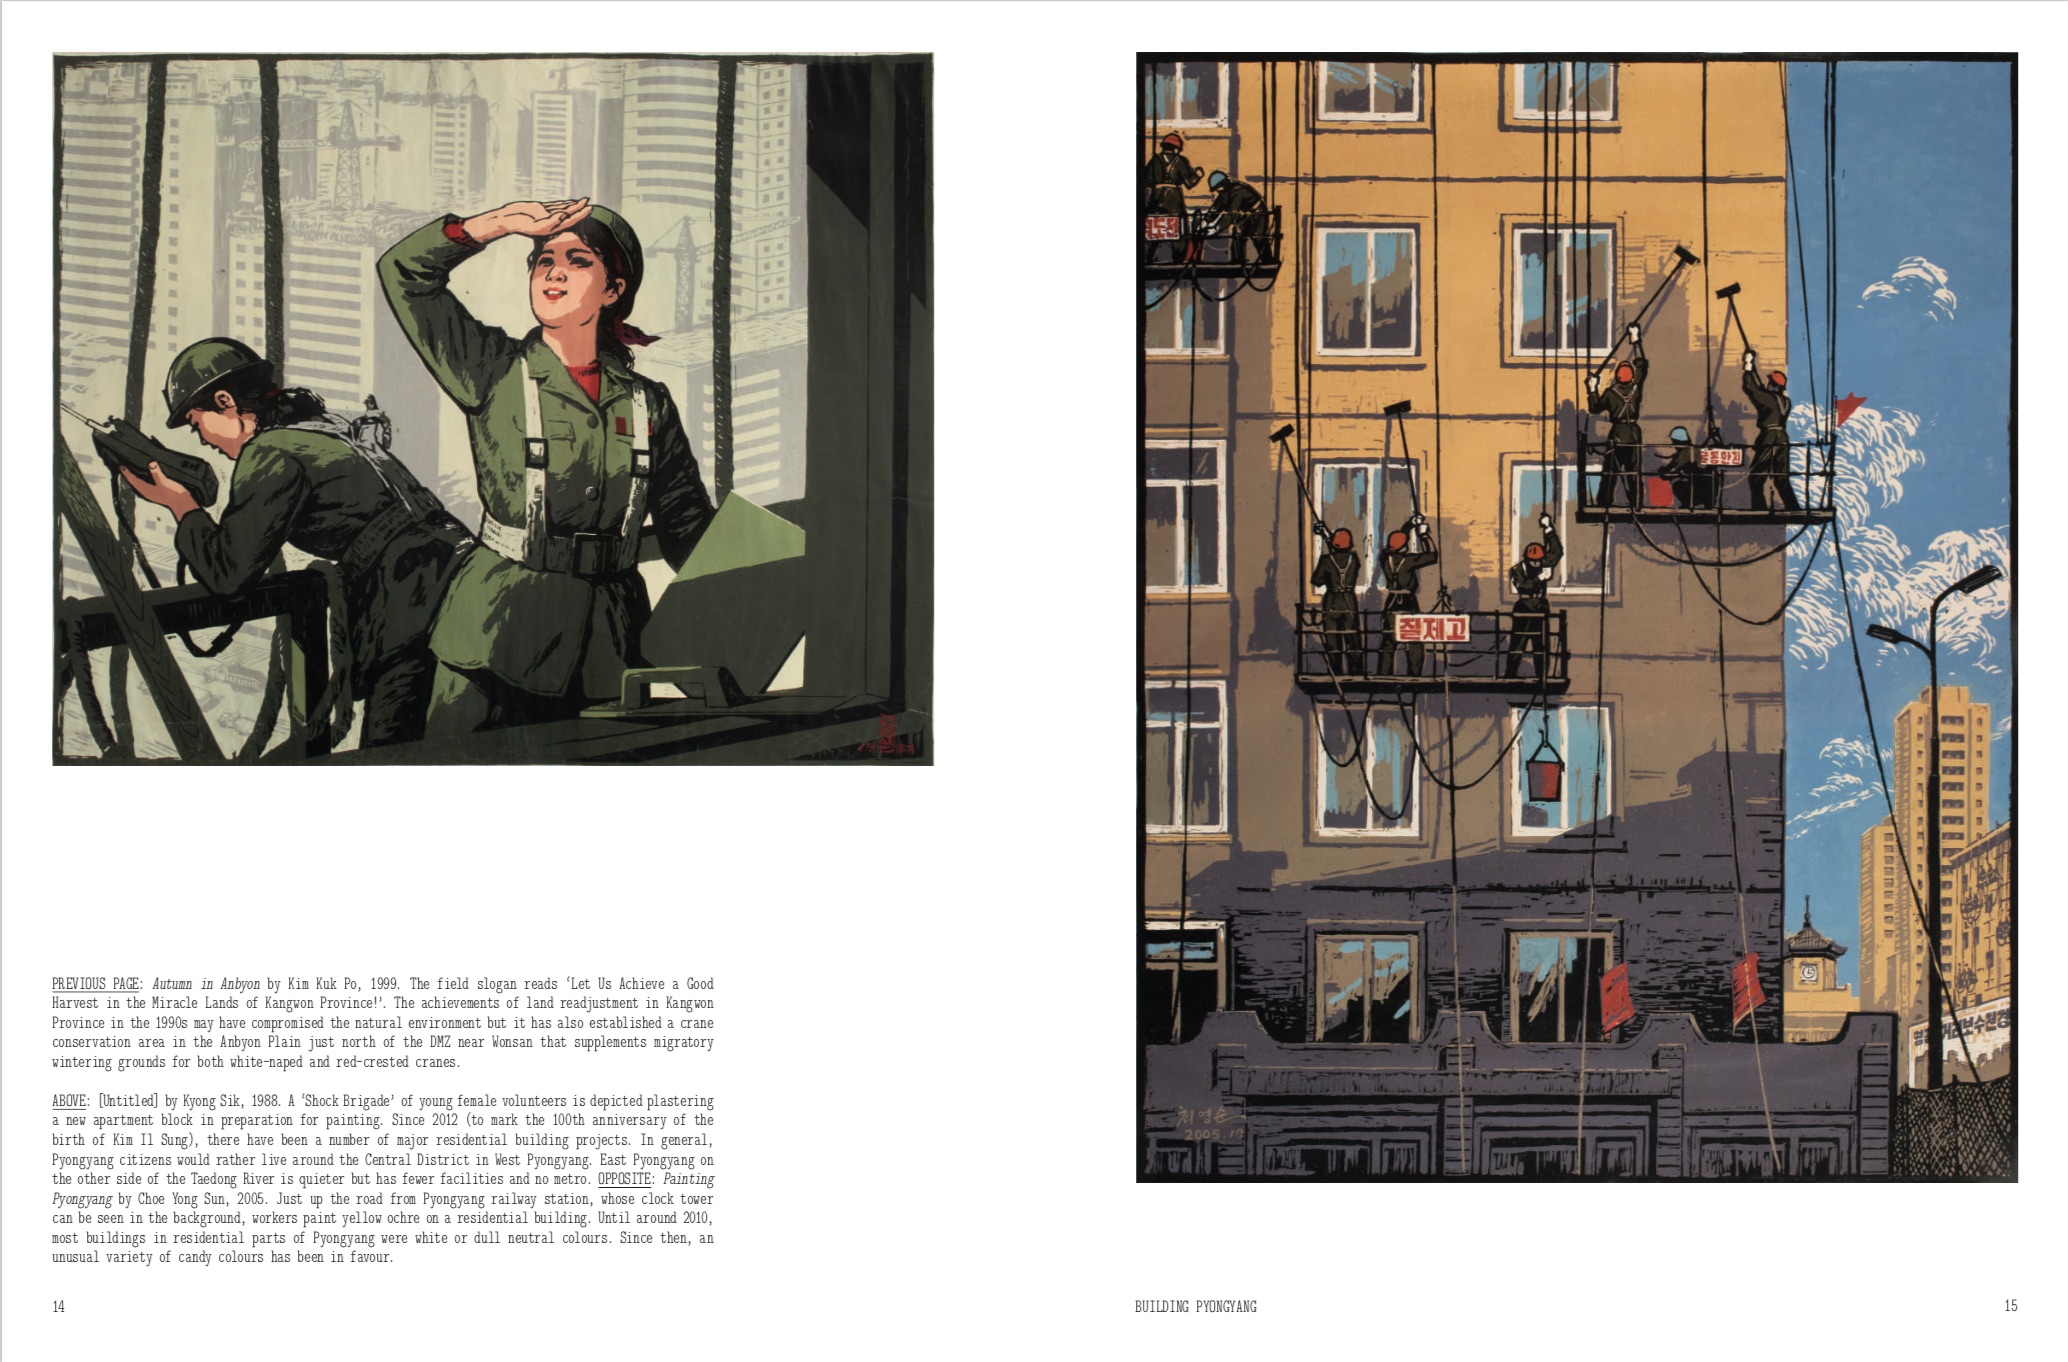 By Nick Bonner from Printed in North Korea: The Art of Everyday Life in the DPRK copyright Phaidon 2019